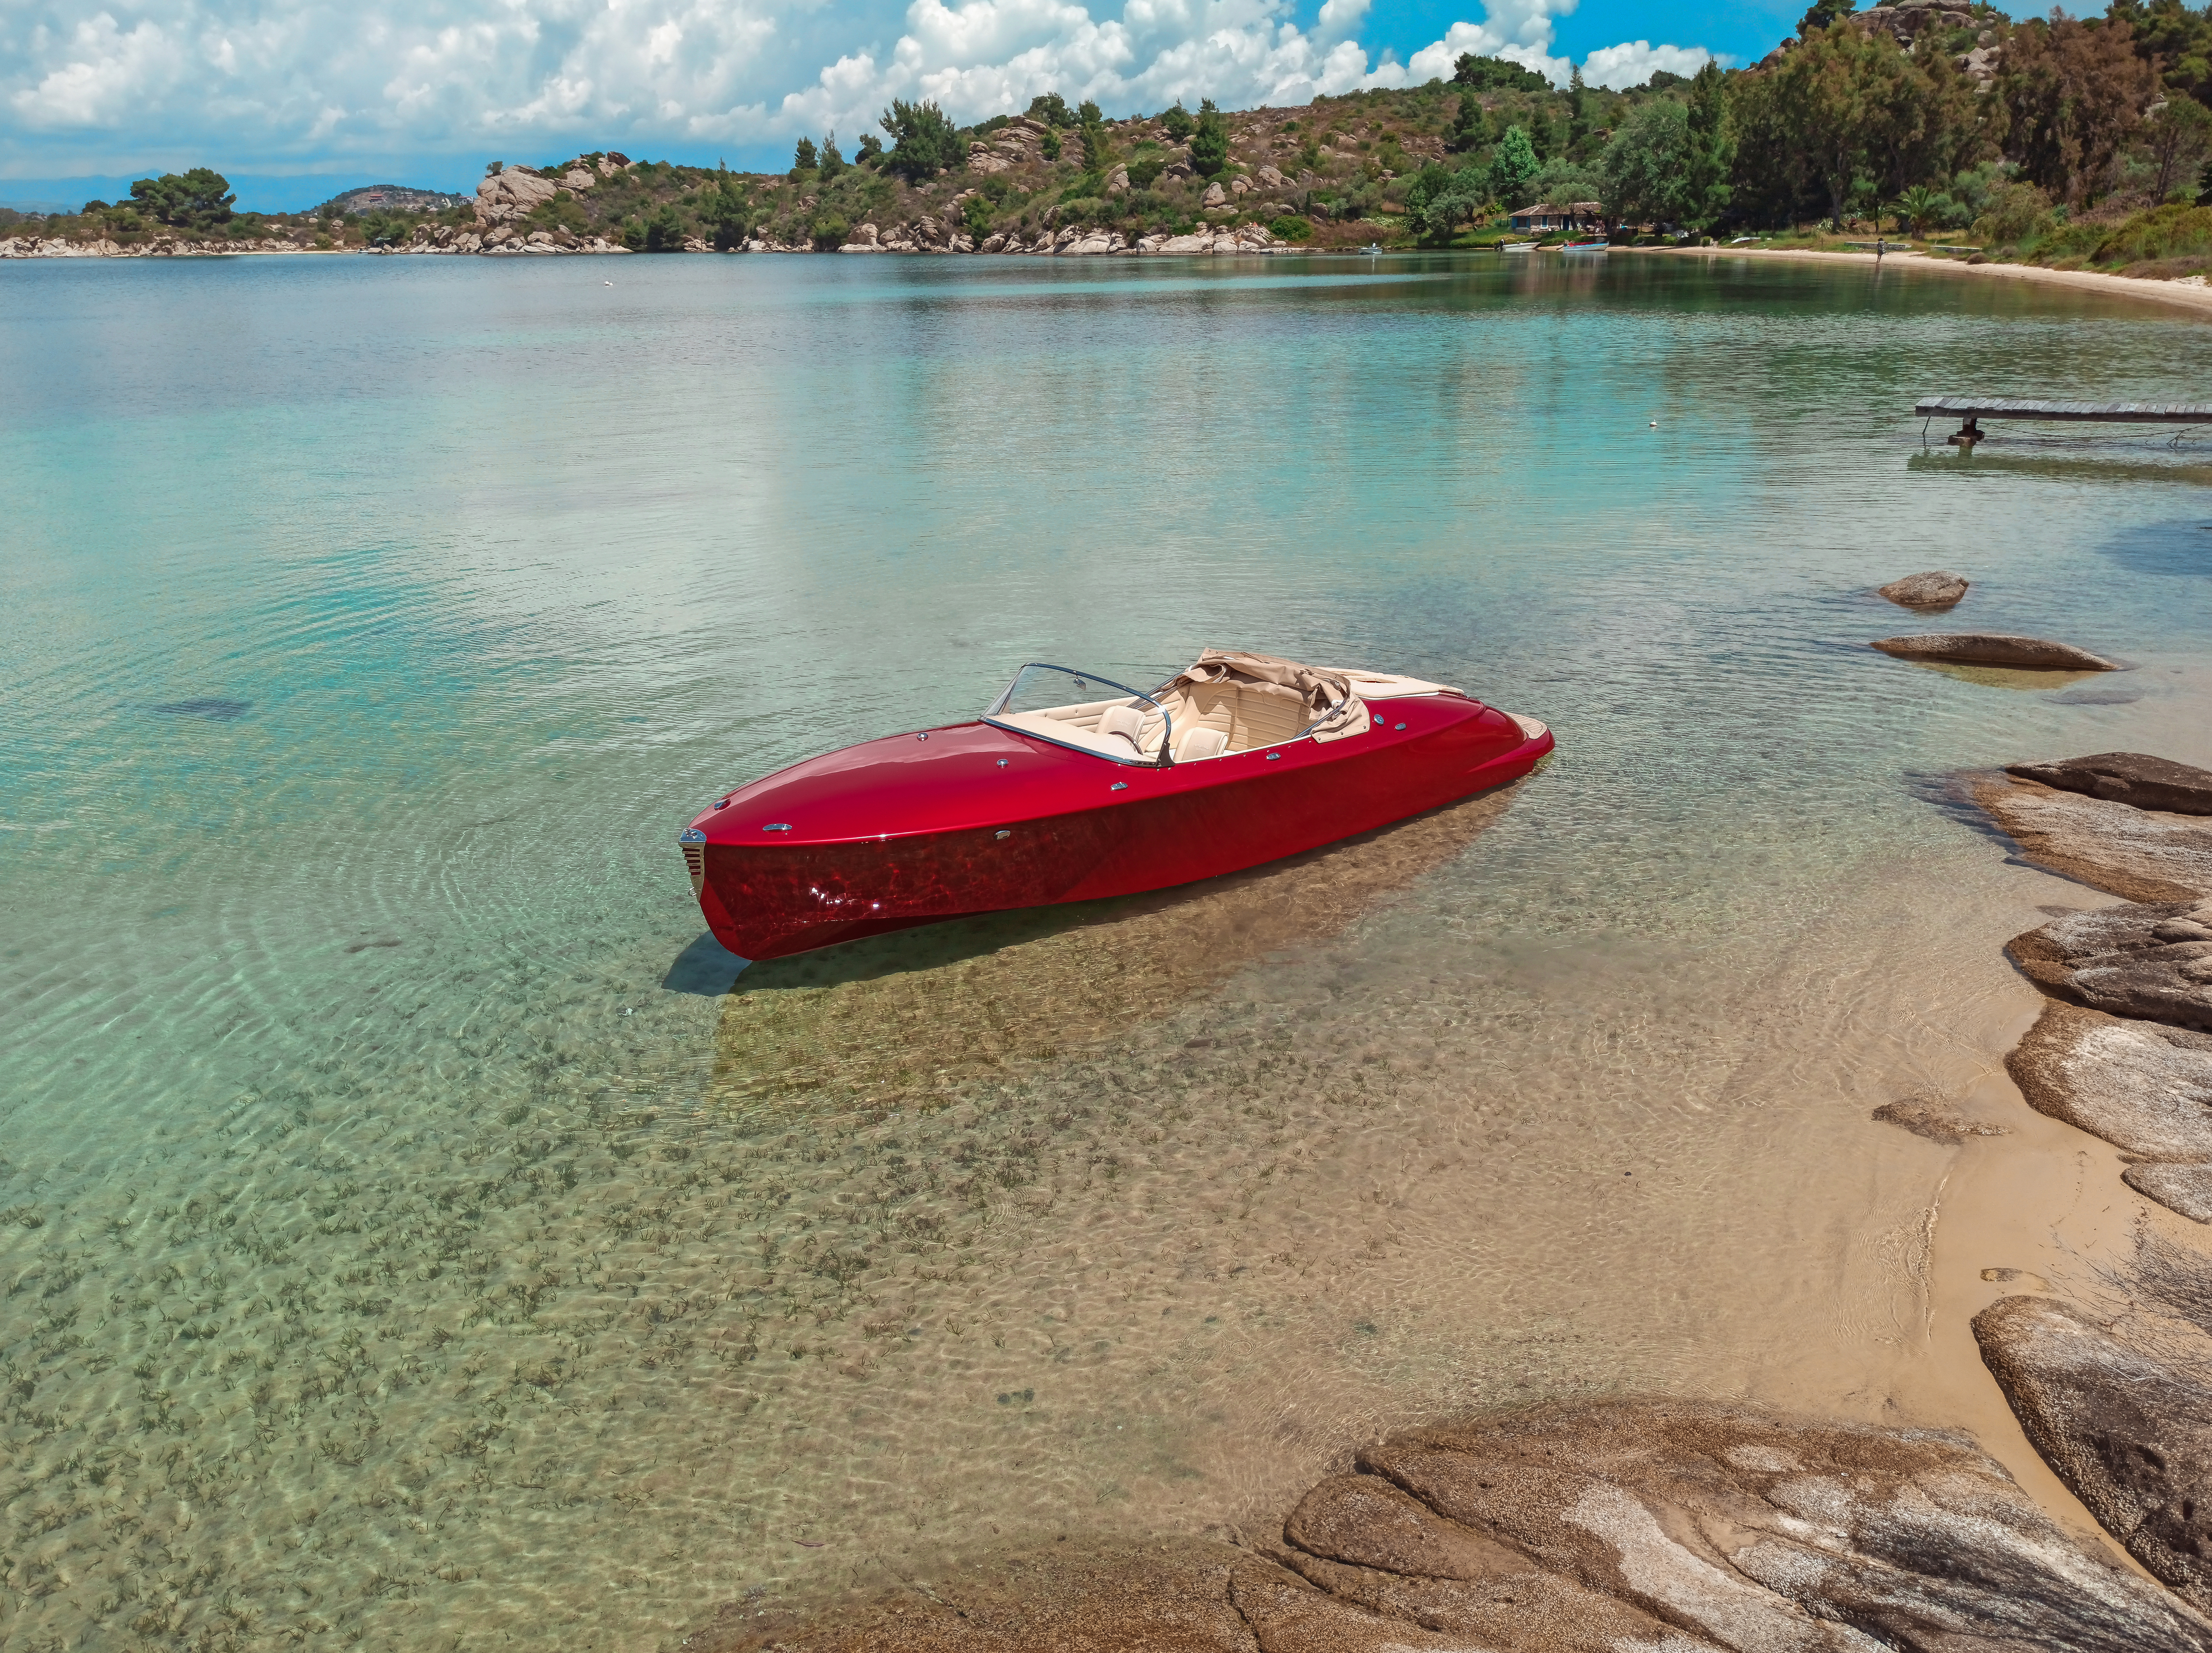 Red Hermes Speedster moored in clear waters of an inlet